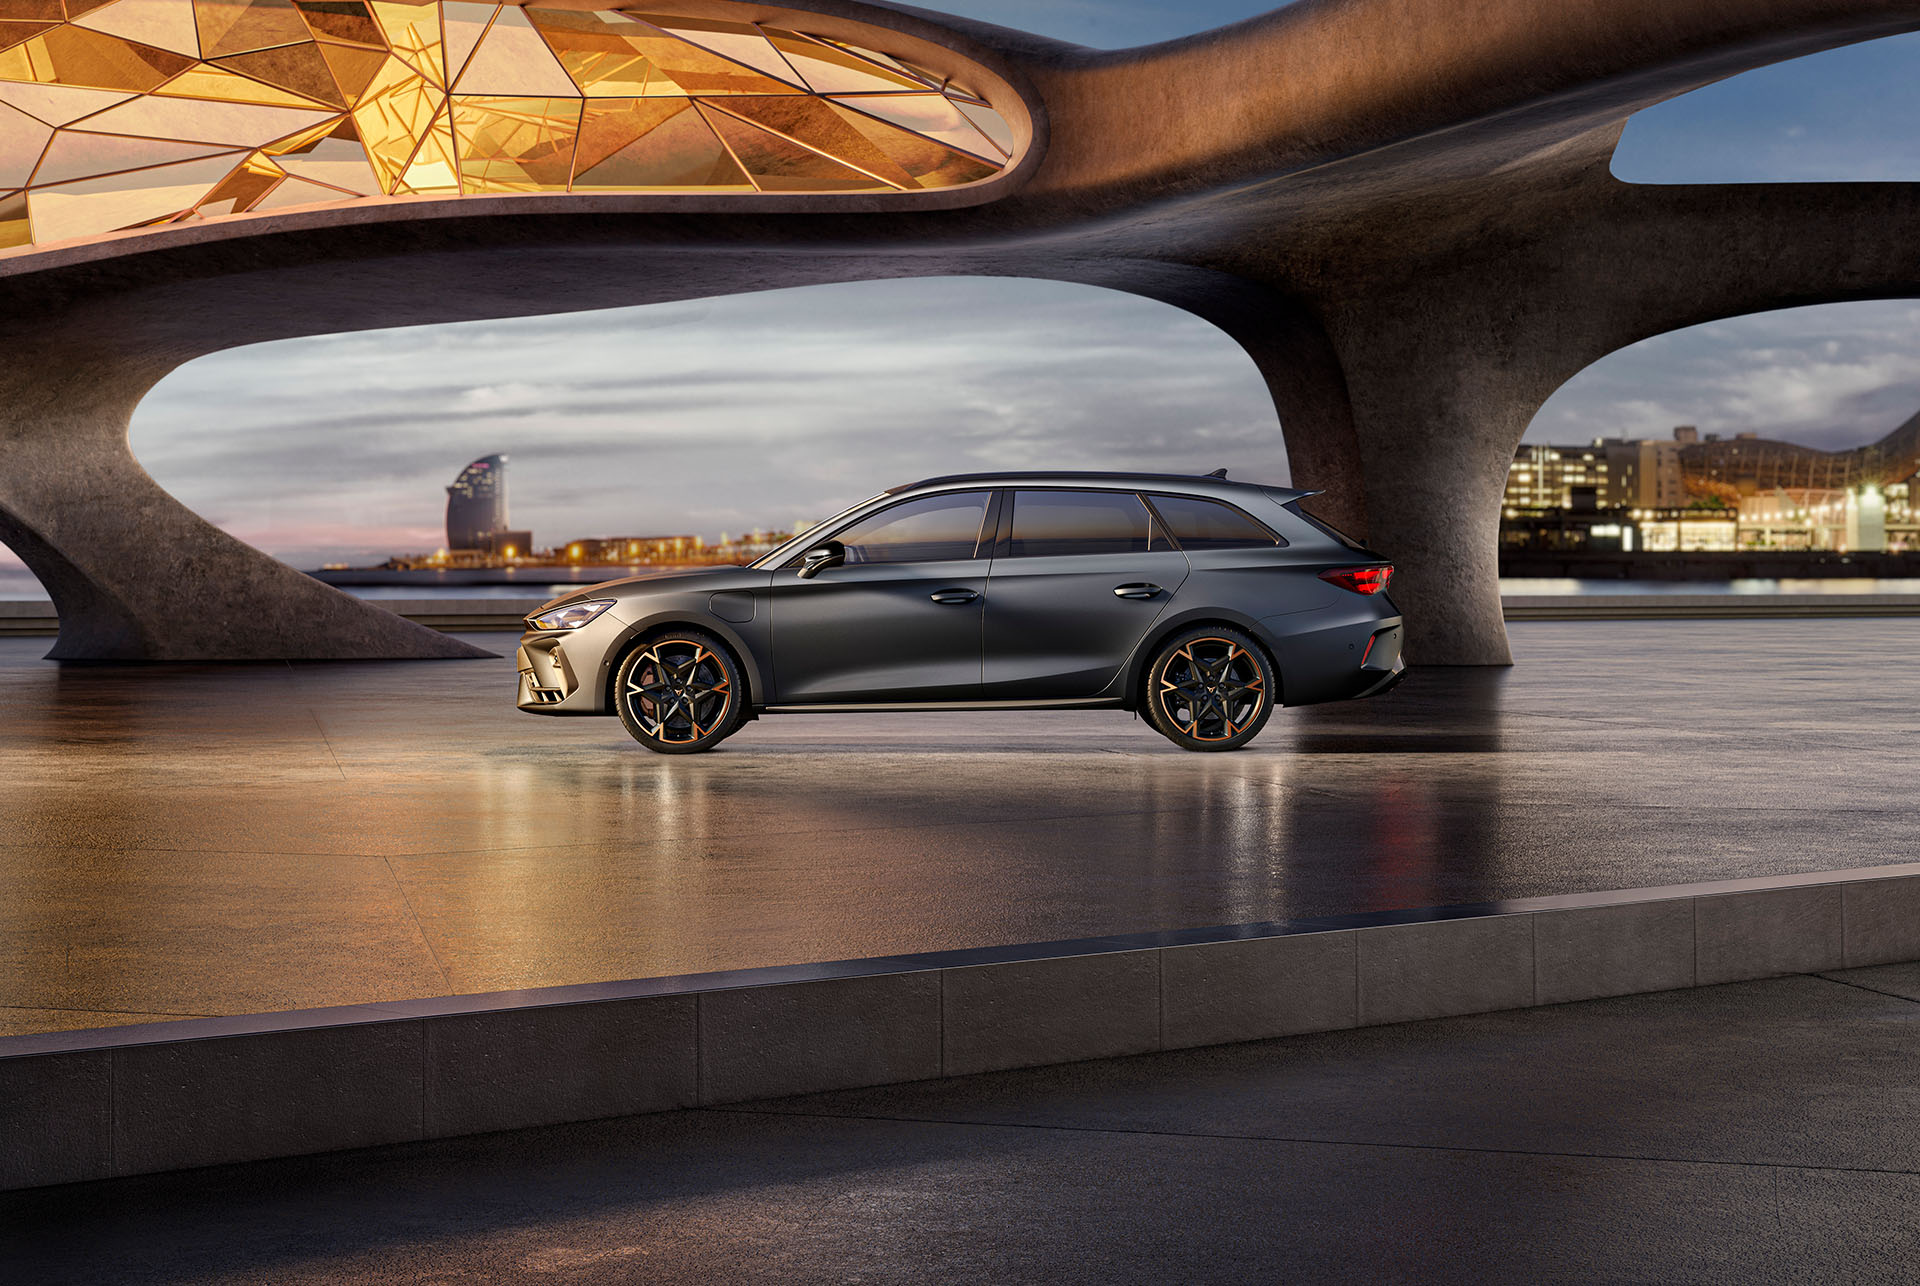 New cupra leon sportstourer 2024 cars and equipment parked on cement, structure with glowing edges, overlooking a city skyline at dusk. The vehicle is shown in a matte grey finish with copper and black alloy wheels.